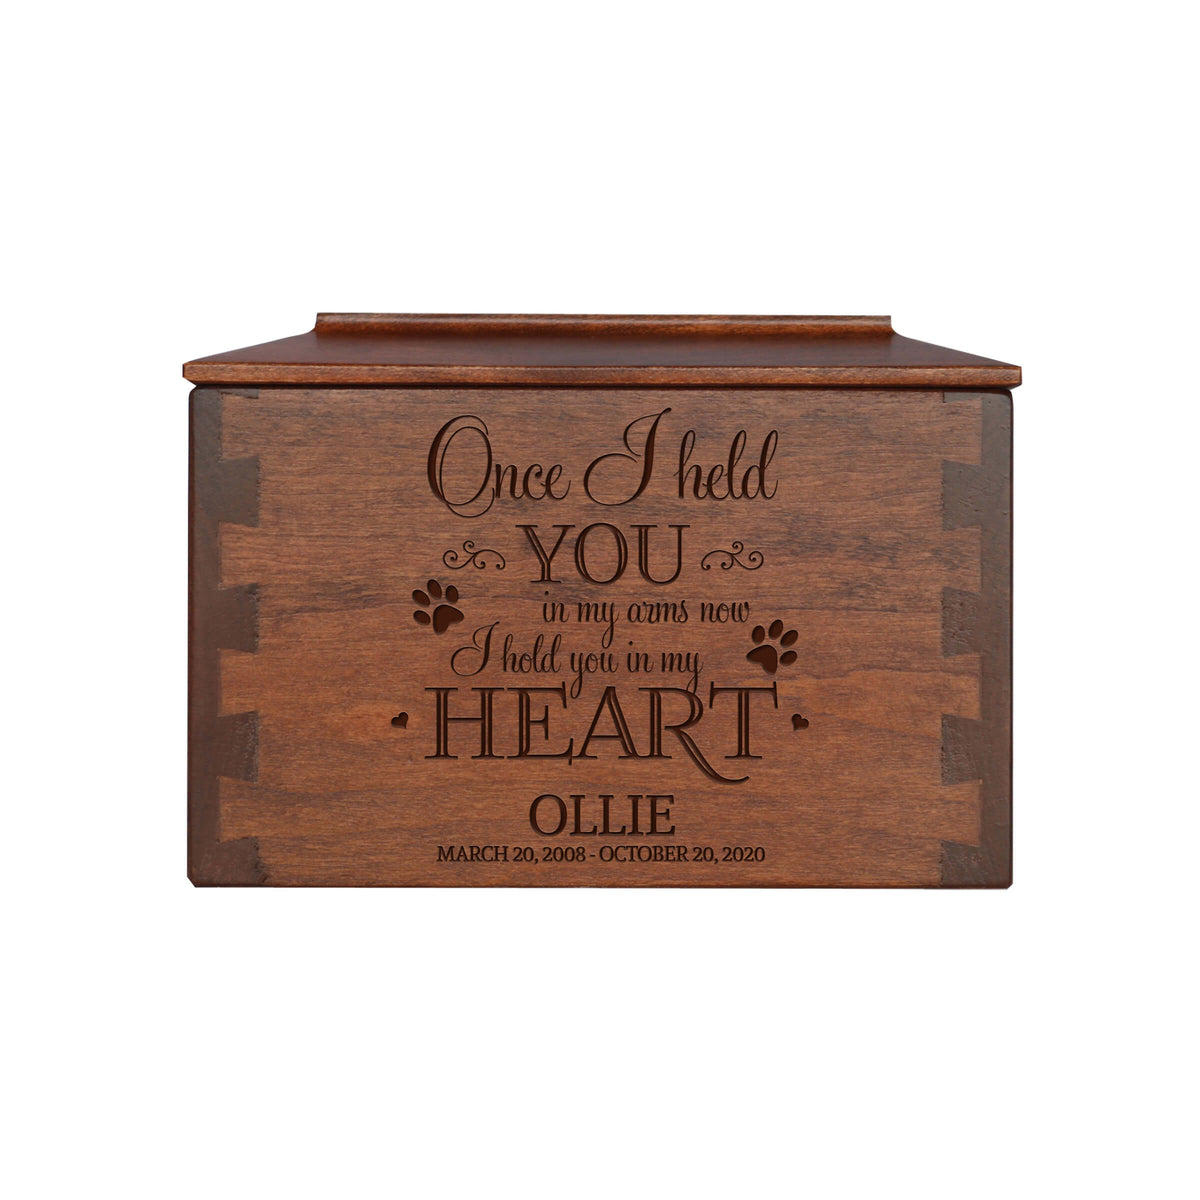 Pet Memorial Dovetail Cremation Urn Box for Dog or Cat - Once I Held You In My Arms